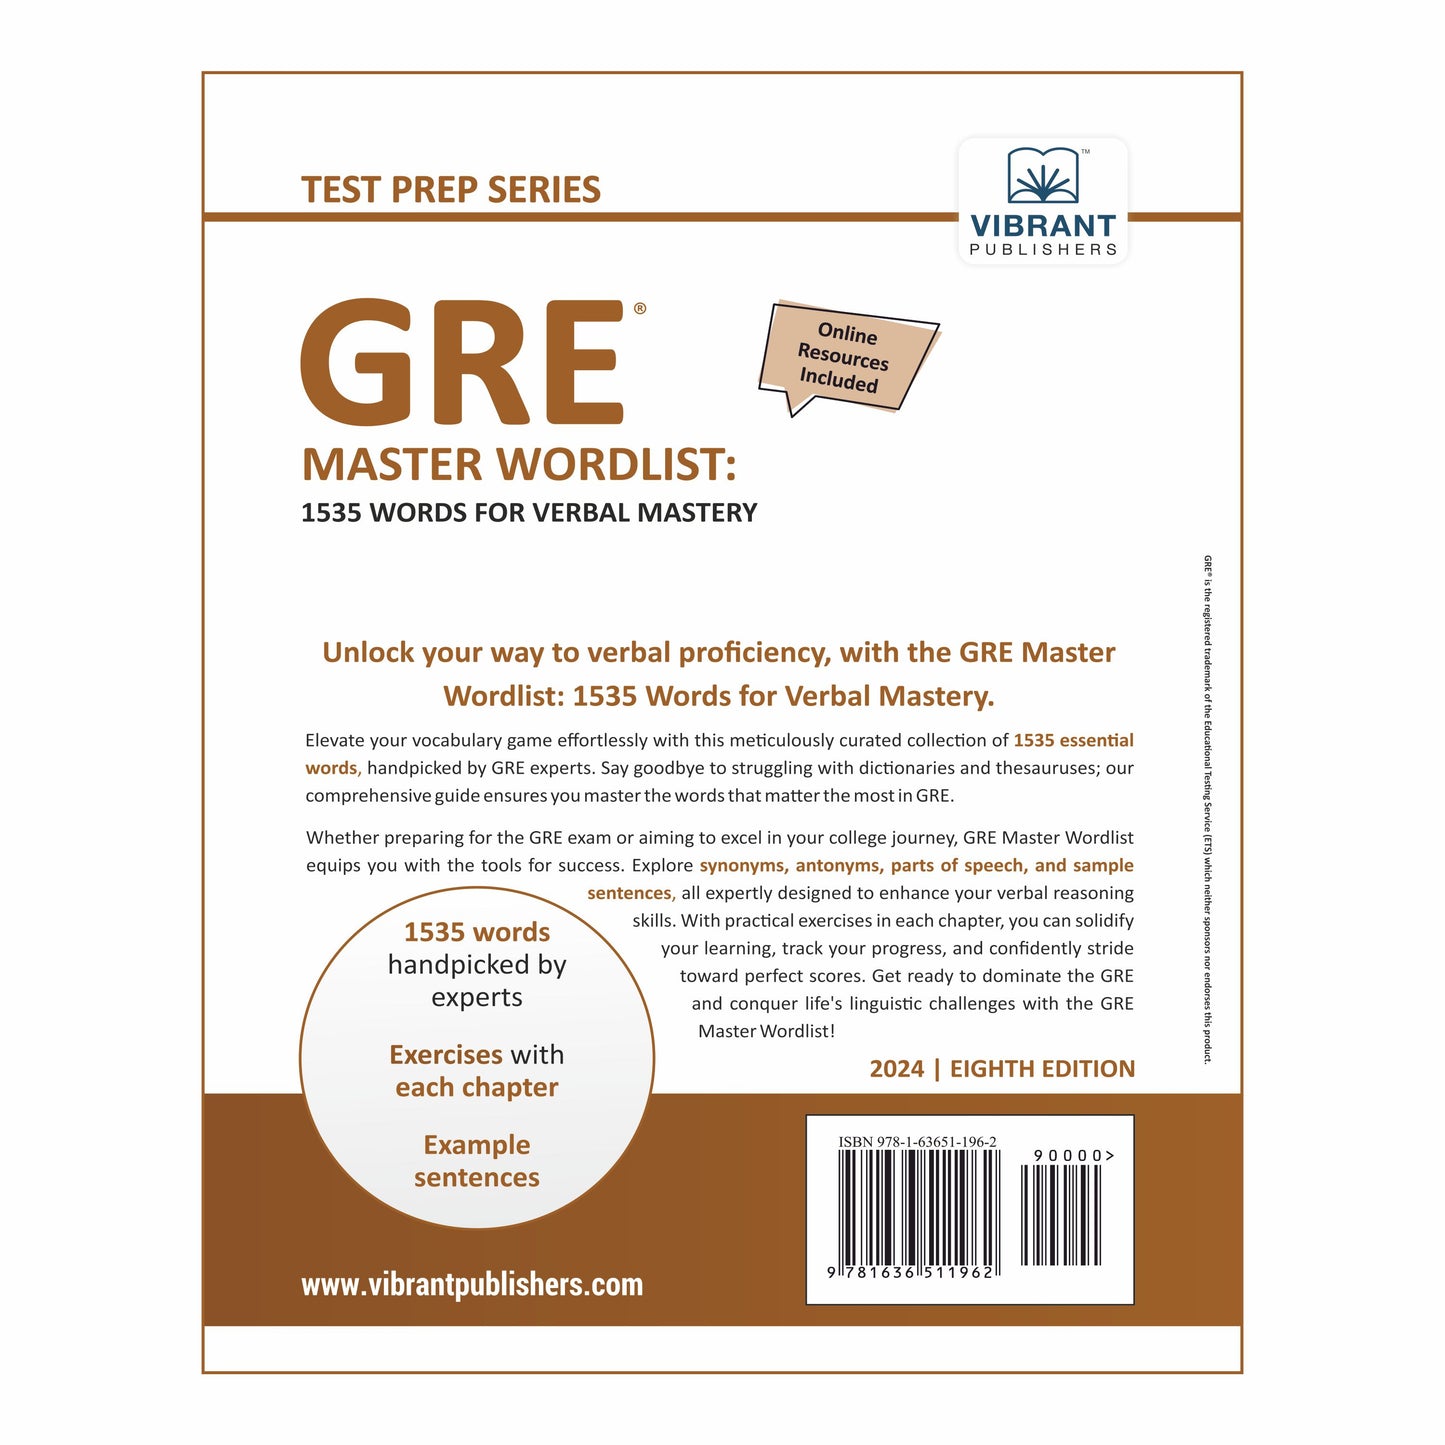 GRE Master Wordlist: 1535 Words for Verbal Mastery (2024 Edition)